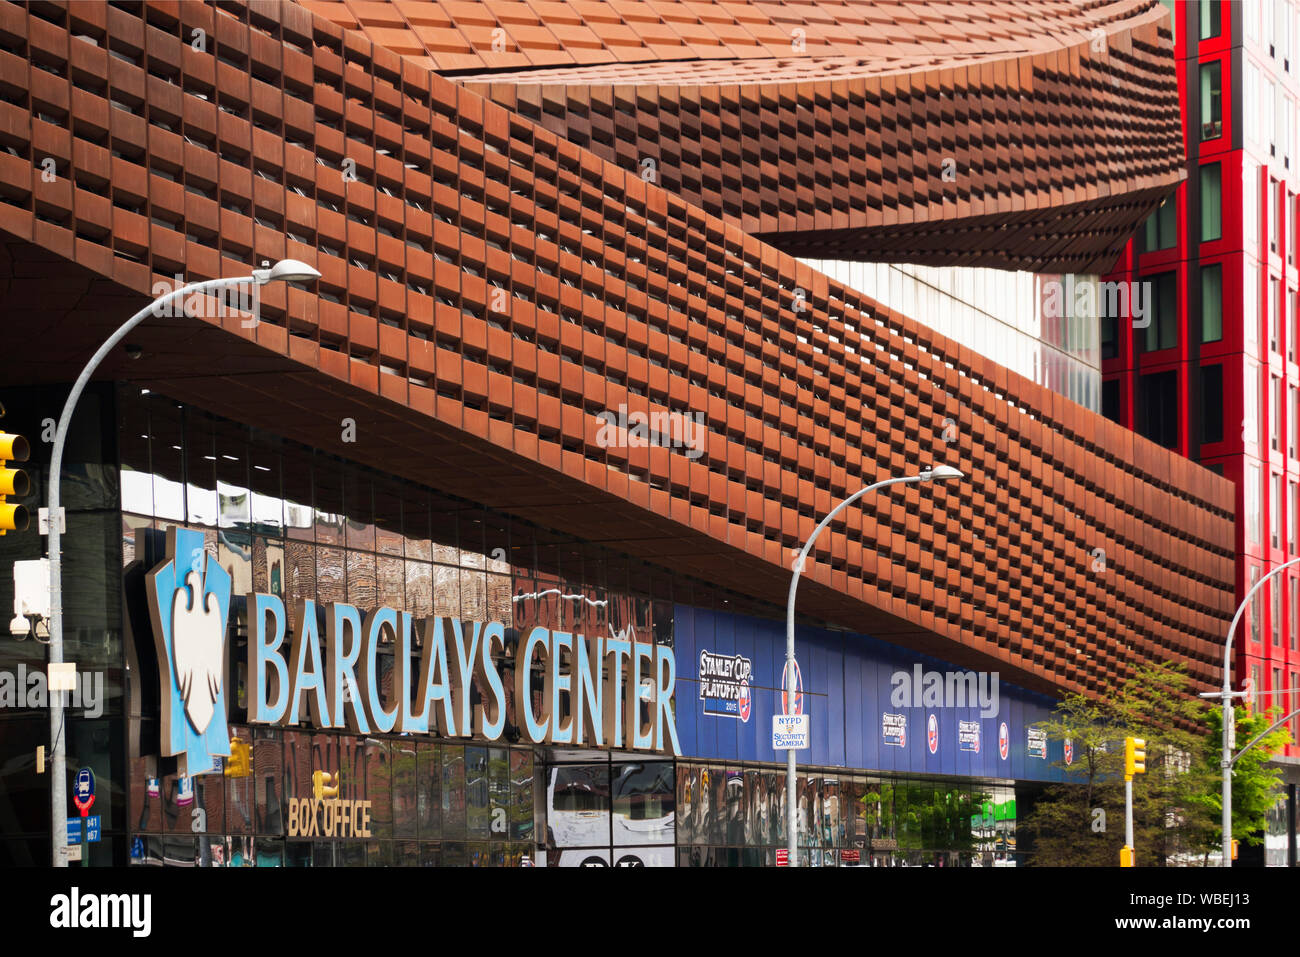 Barclay center in downtown Brooklyn NYC Stock Photo